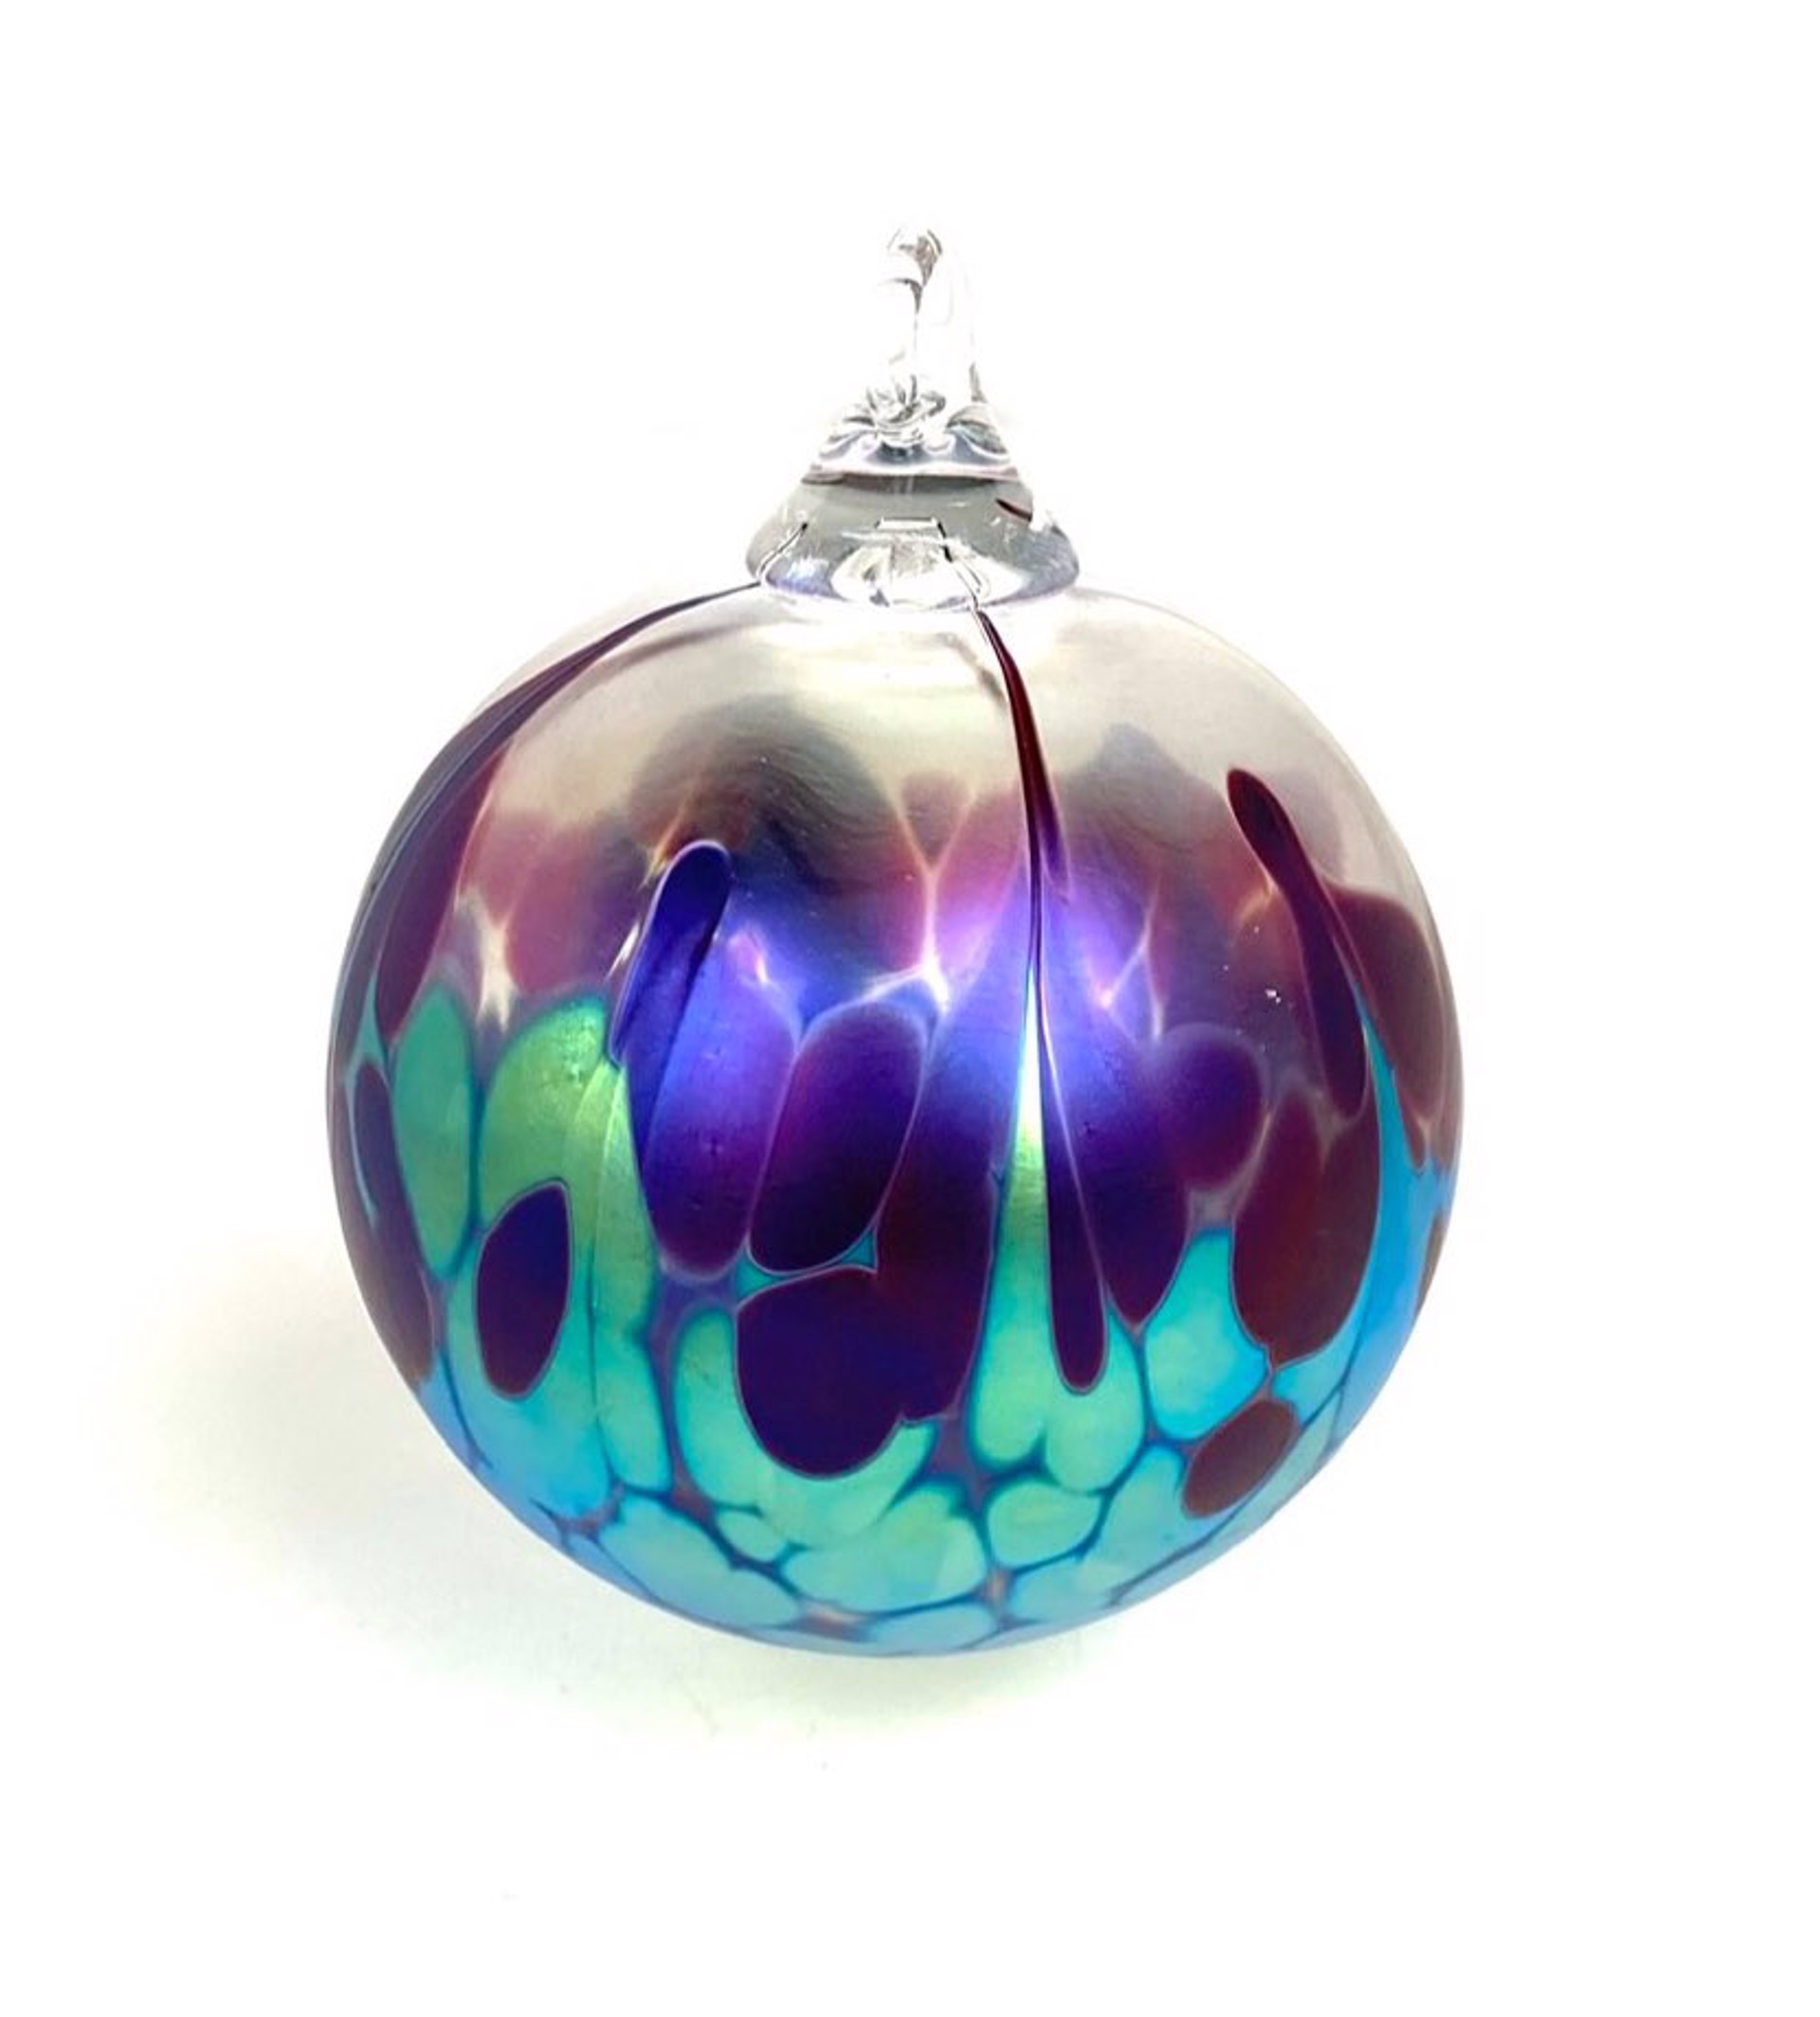 Artisan Peacock Ornament by Furnace Glass